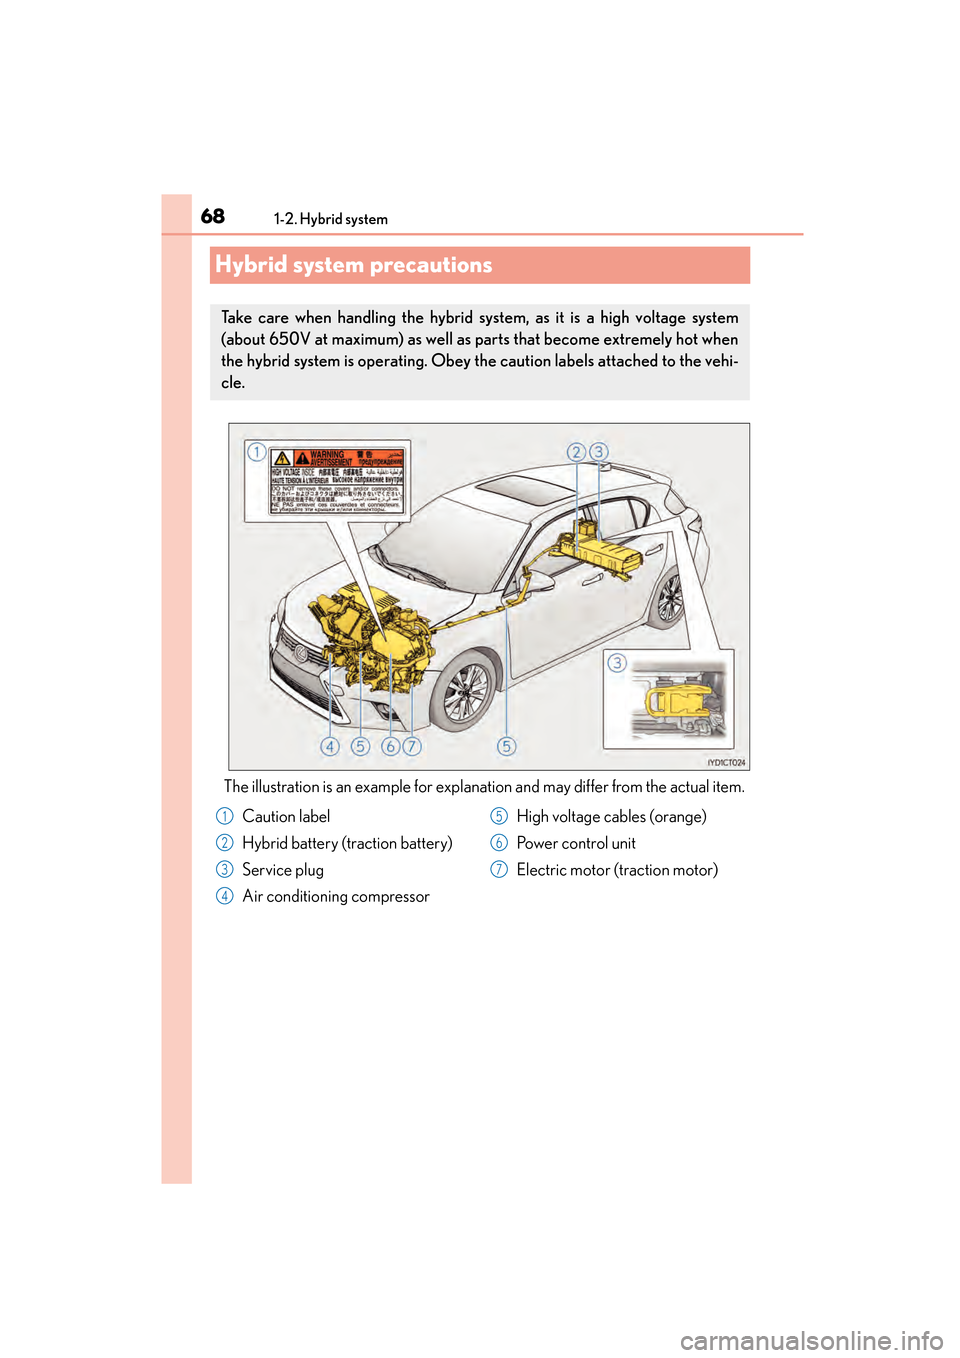 Lexus CT200h 2015  Owners Manual (in English) 681-2. Hybrid system
CT200h_OM_OM76174U_(U)
Hybrid system precautions
The illustration is an example for explanation and may differ from the actual item.
Take care when handling the hybrid system, as 